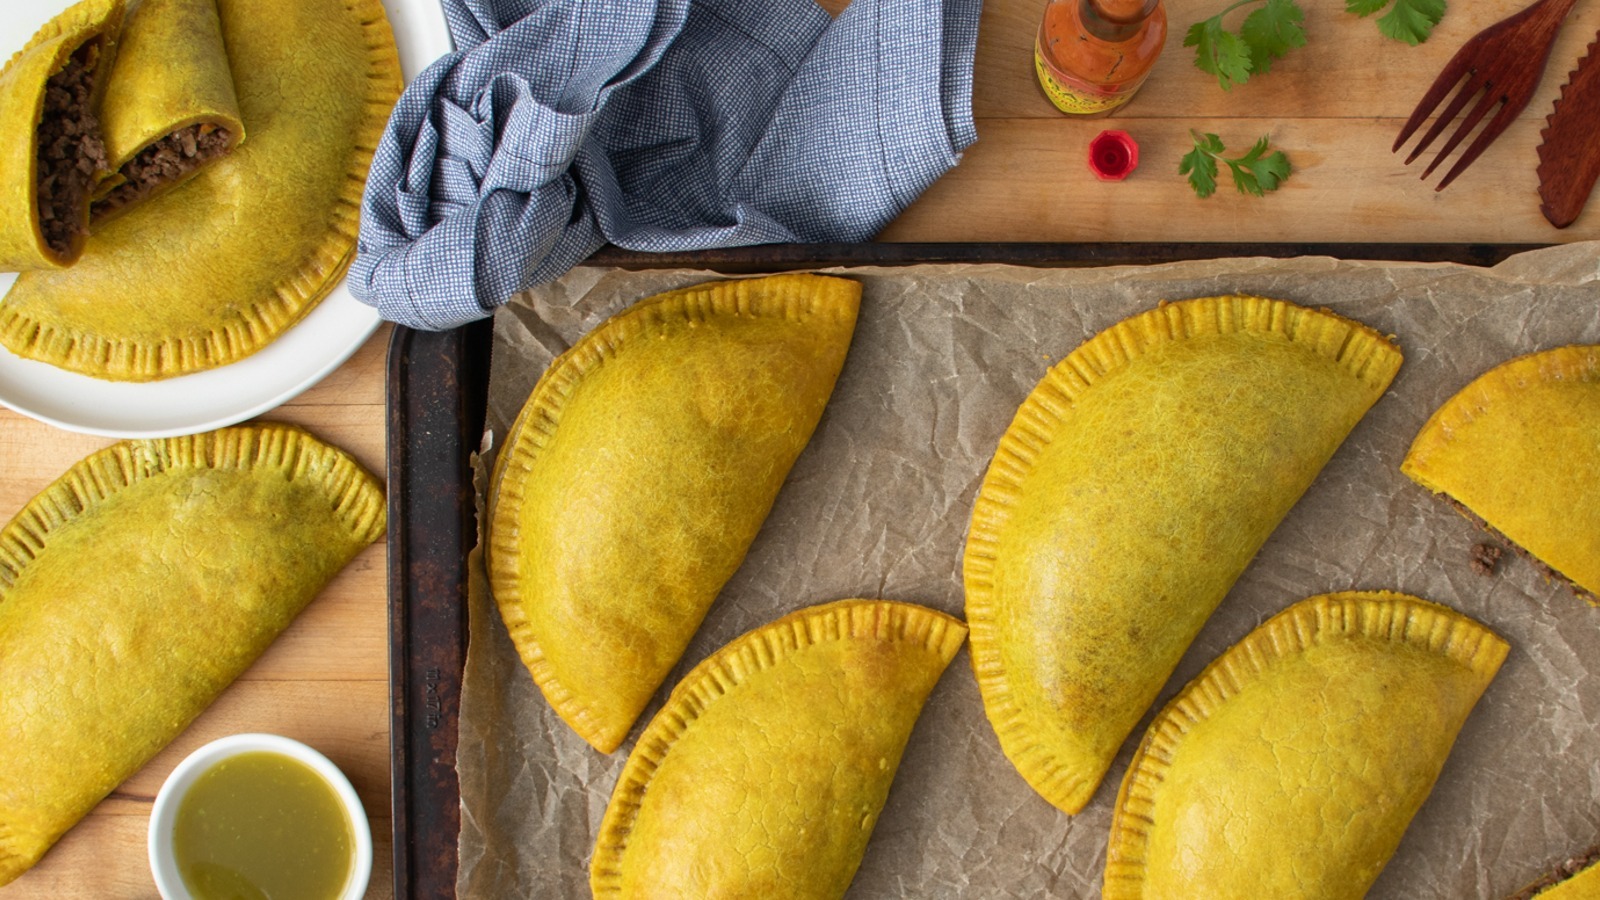 Baked Jamaican Beef Patty Recipe